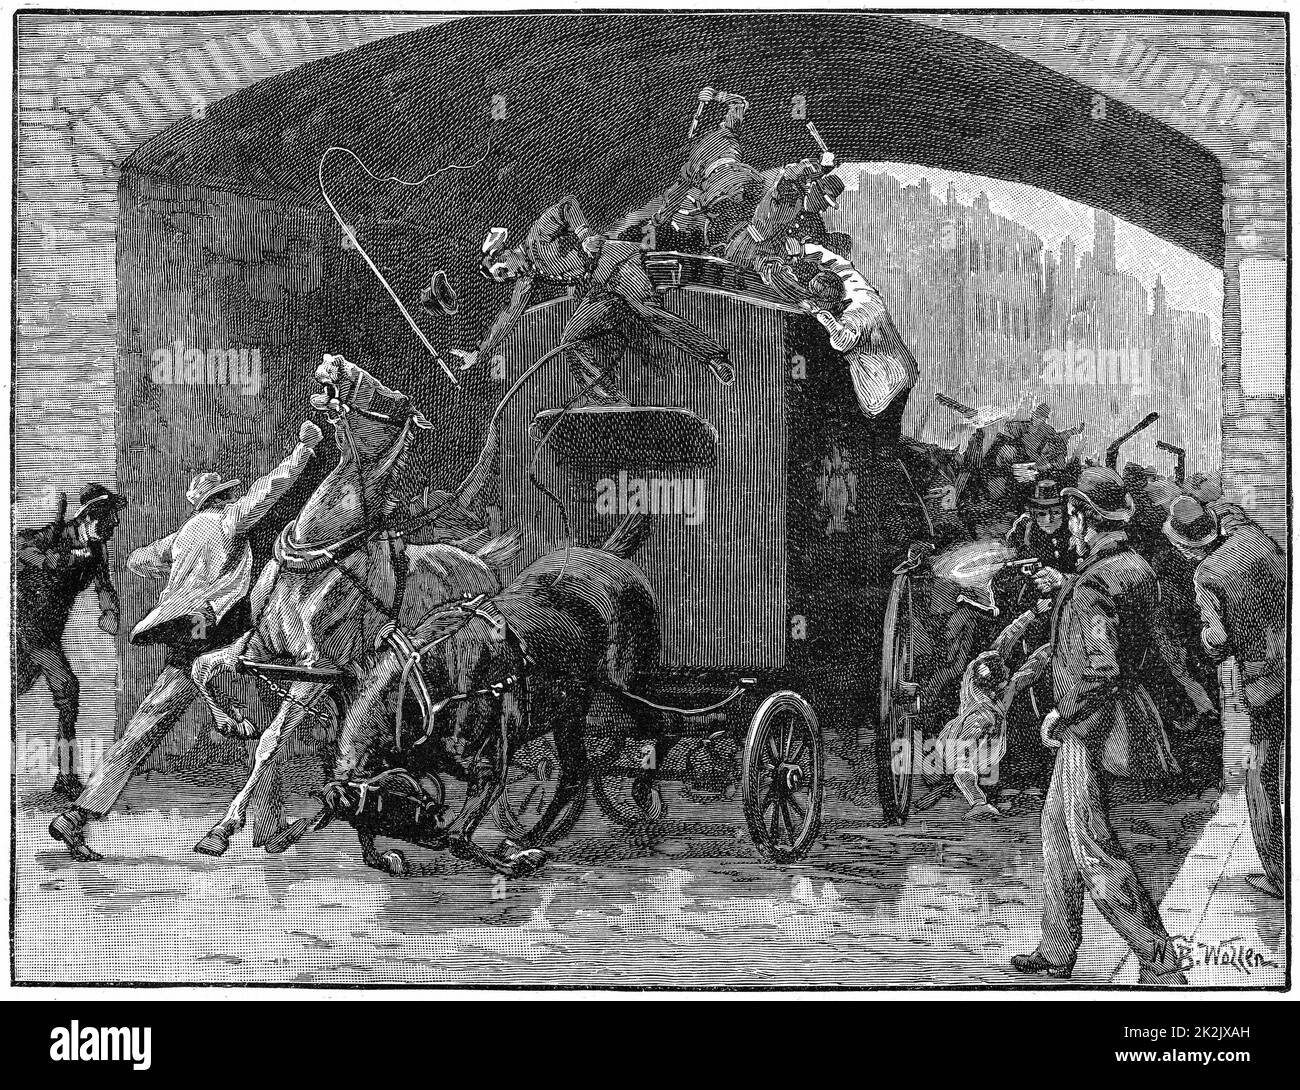 Fenian Conspiracy leaders Kelly and Deasy rescued from police van passing under railway bridge in Hyde Street on way from court in Manchester to prison, 18 September 1867. Police sergeant shot dead. Wood engraving Stock Photo